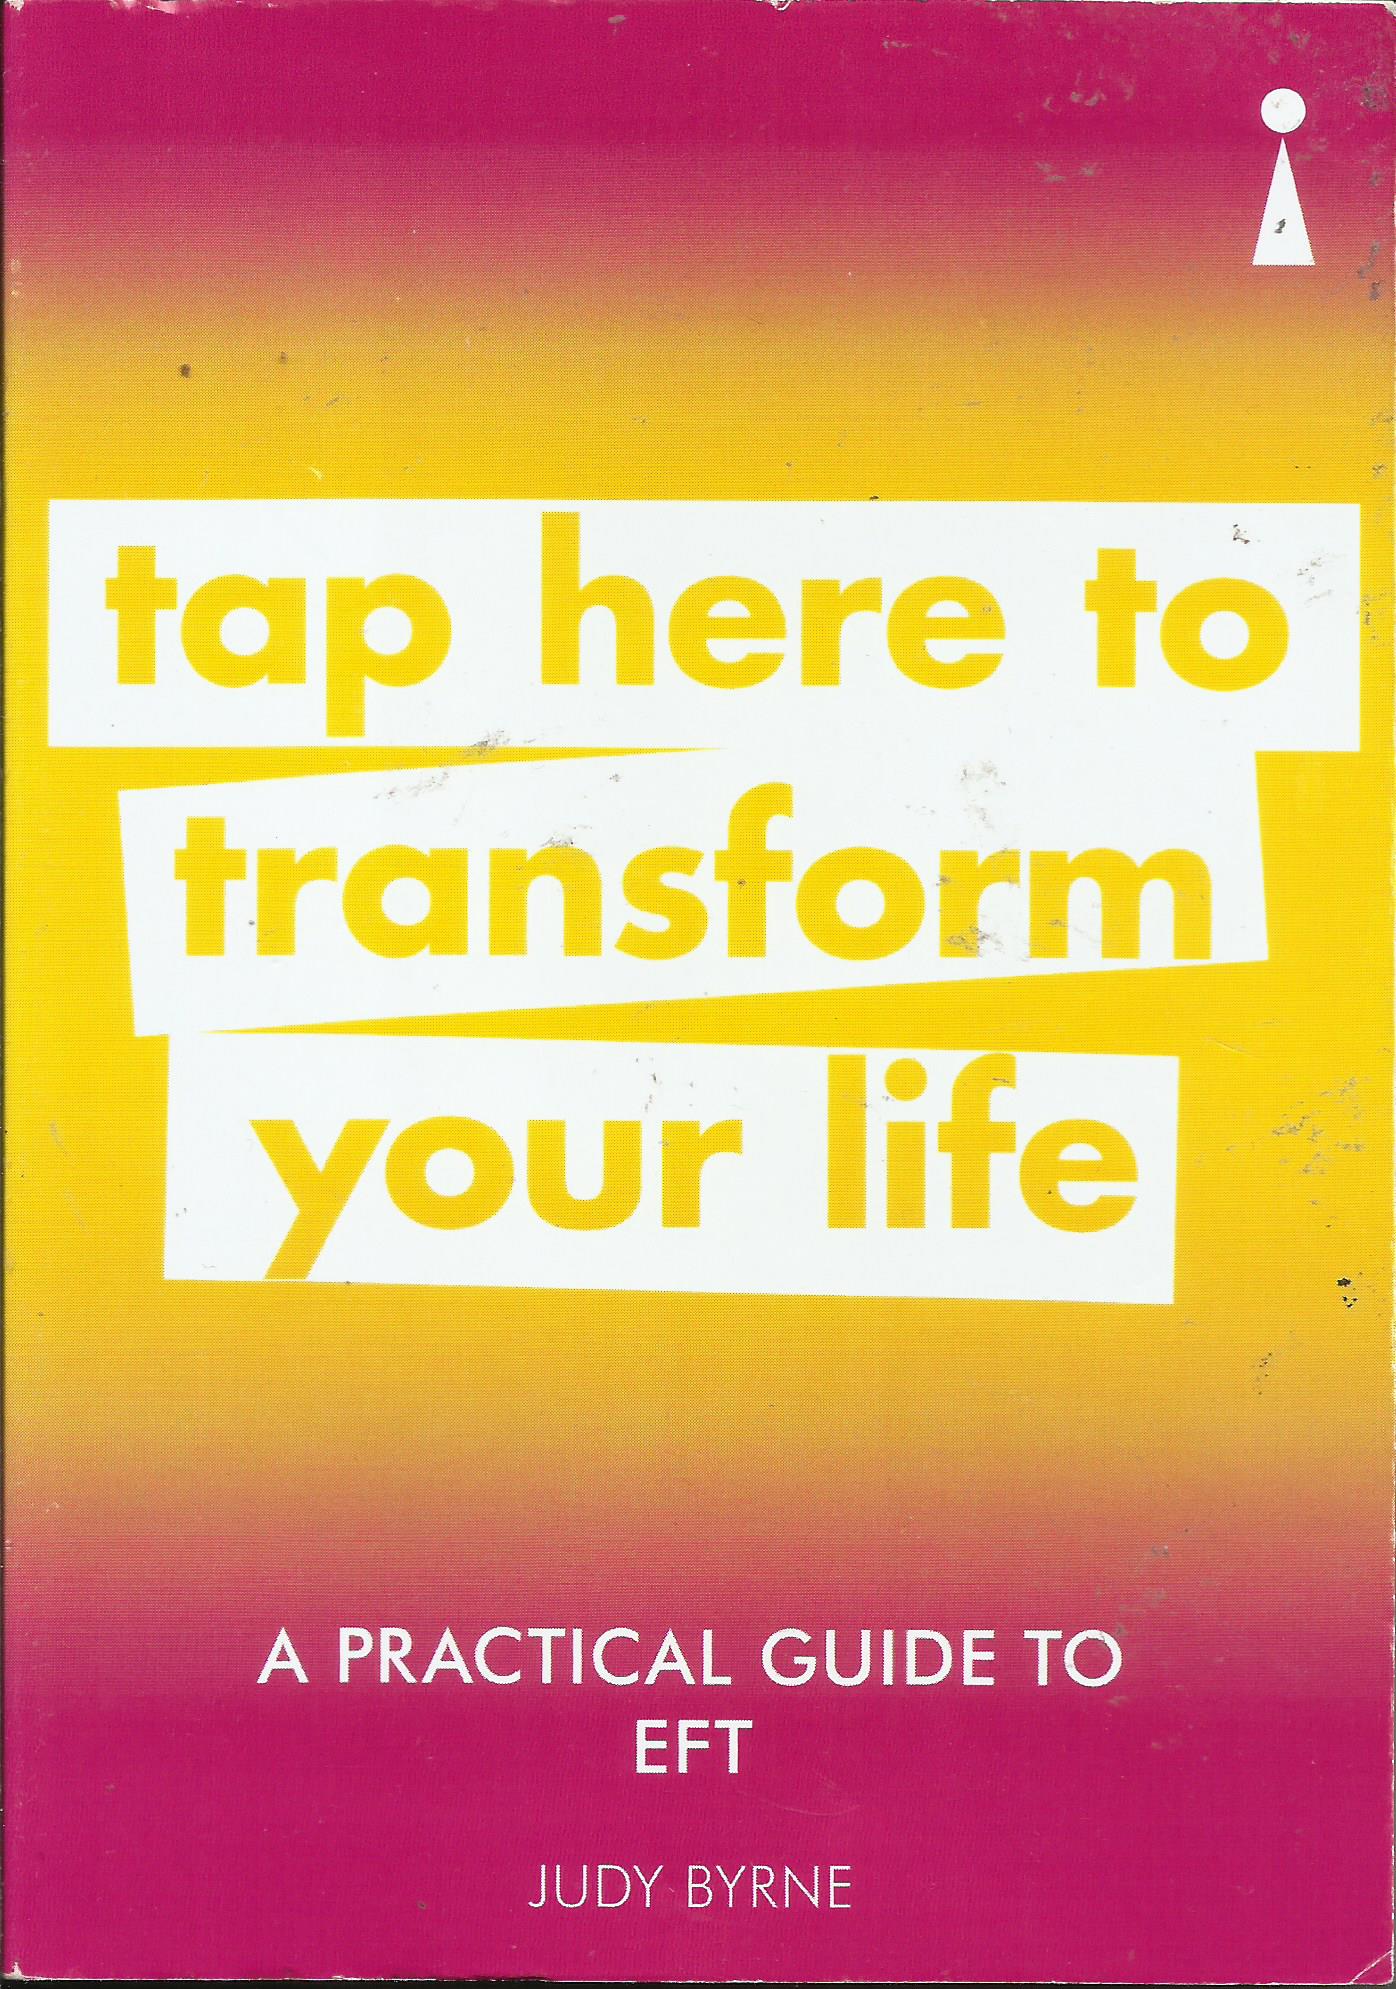 Tap here to transform your life